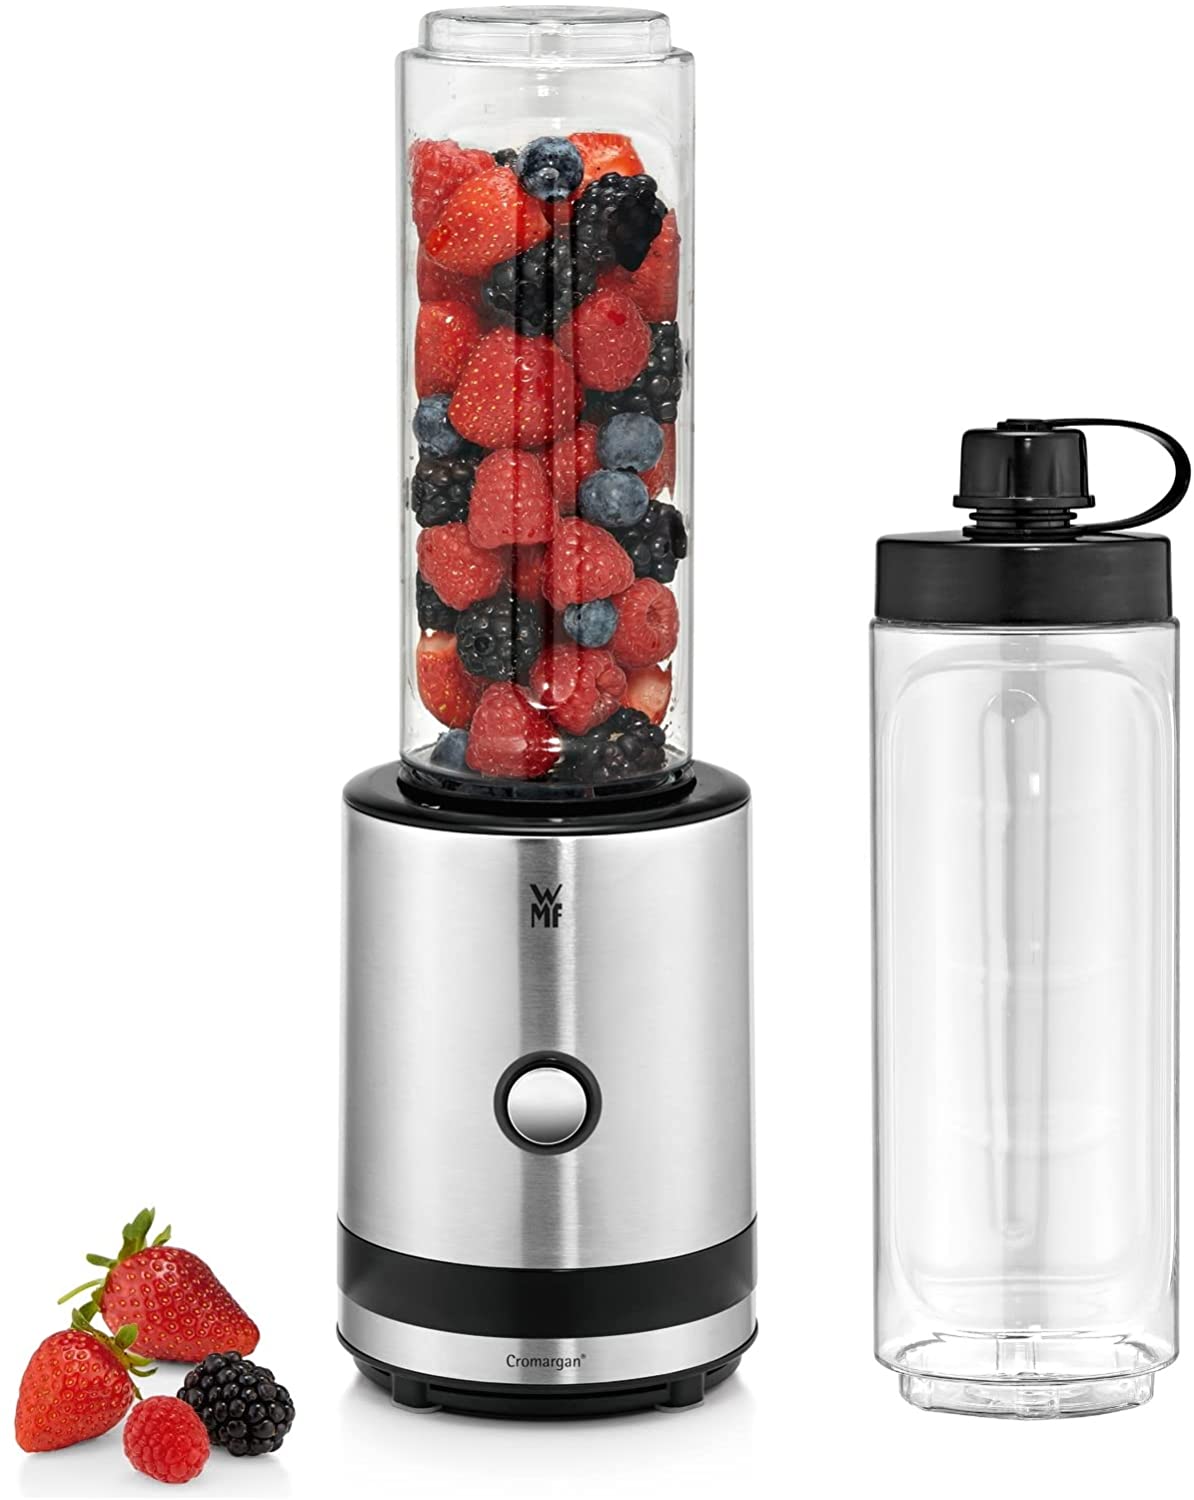 WMF KÜCHENminis Smoothie-to-Go Mini Blender With Two Mixing/Drinking Containers (0.6 l, 300 W, Cromargan)